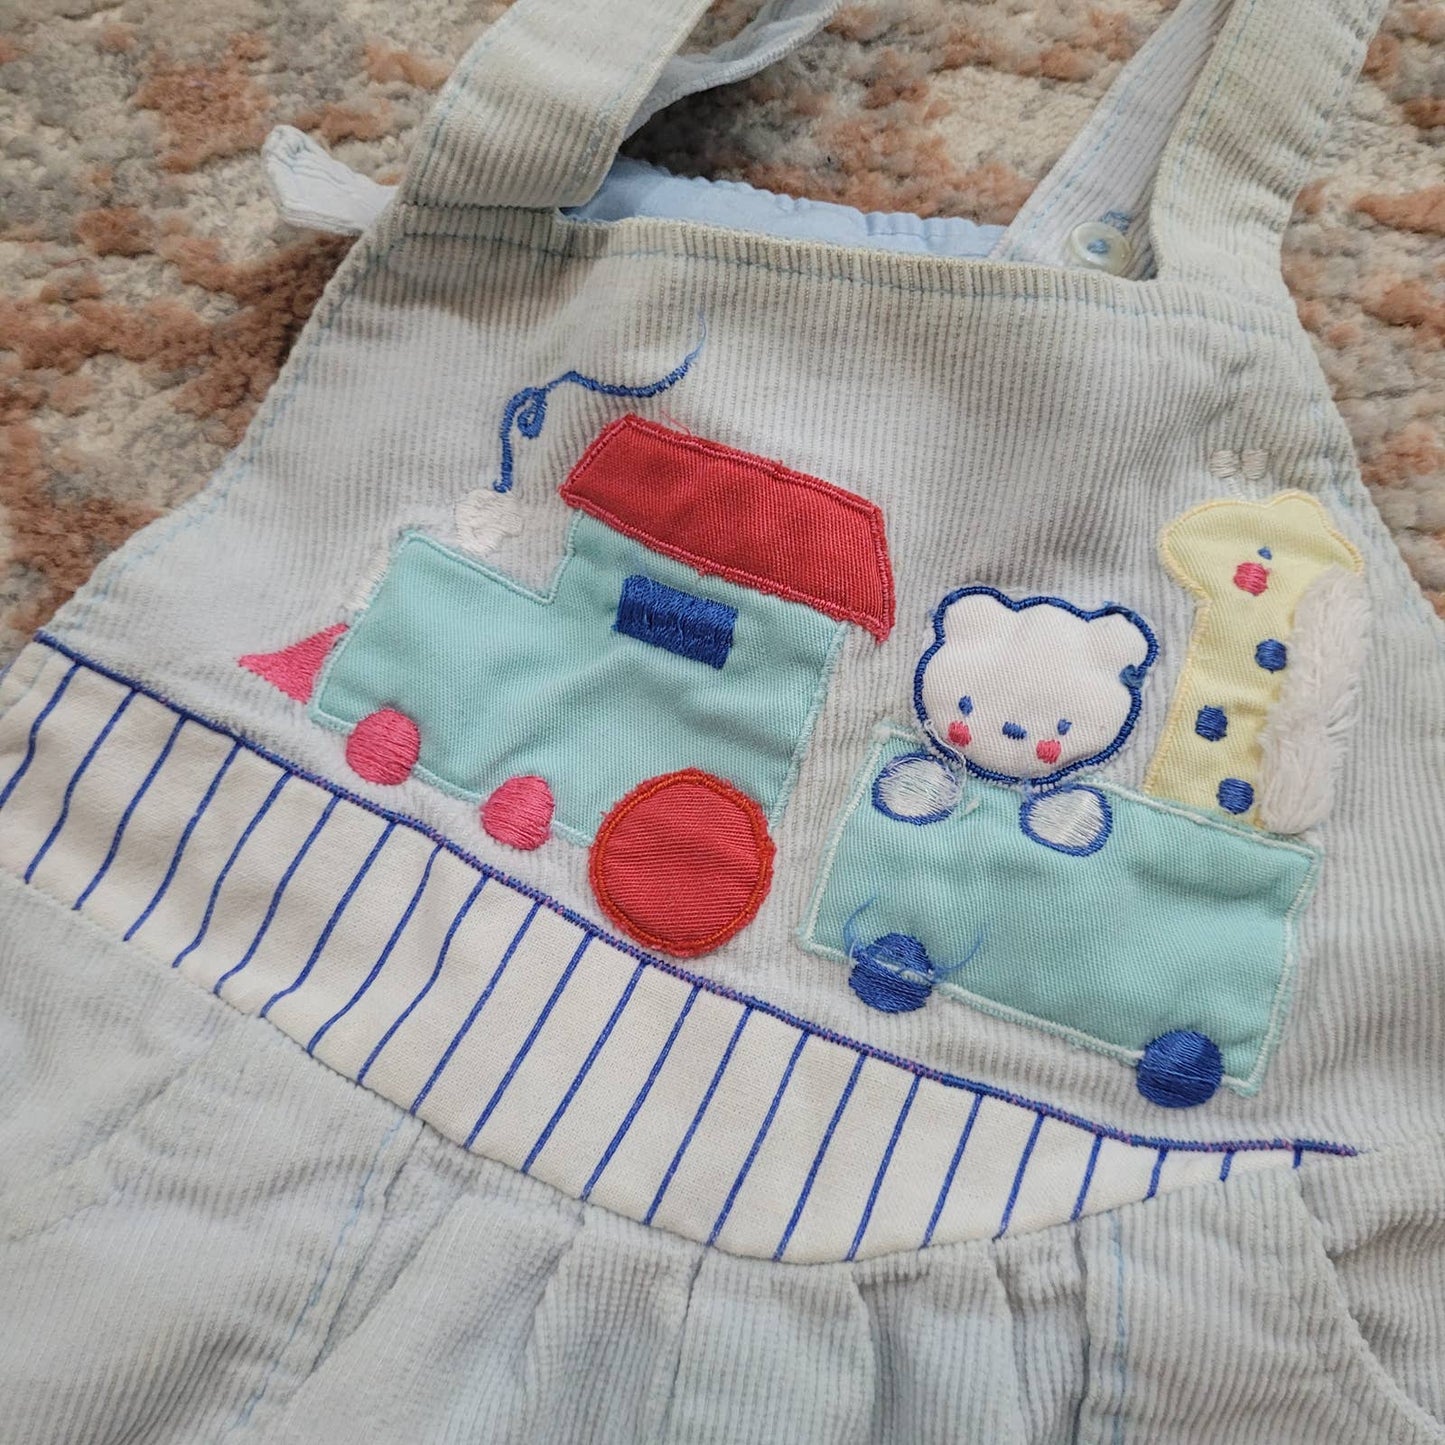 Blue Cordouroy Overalls with Bear and Giraffe on a Train